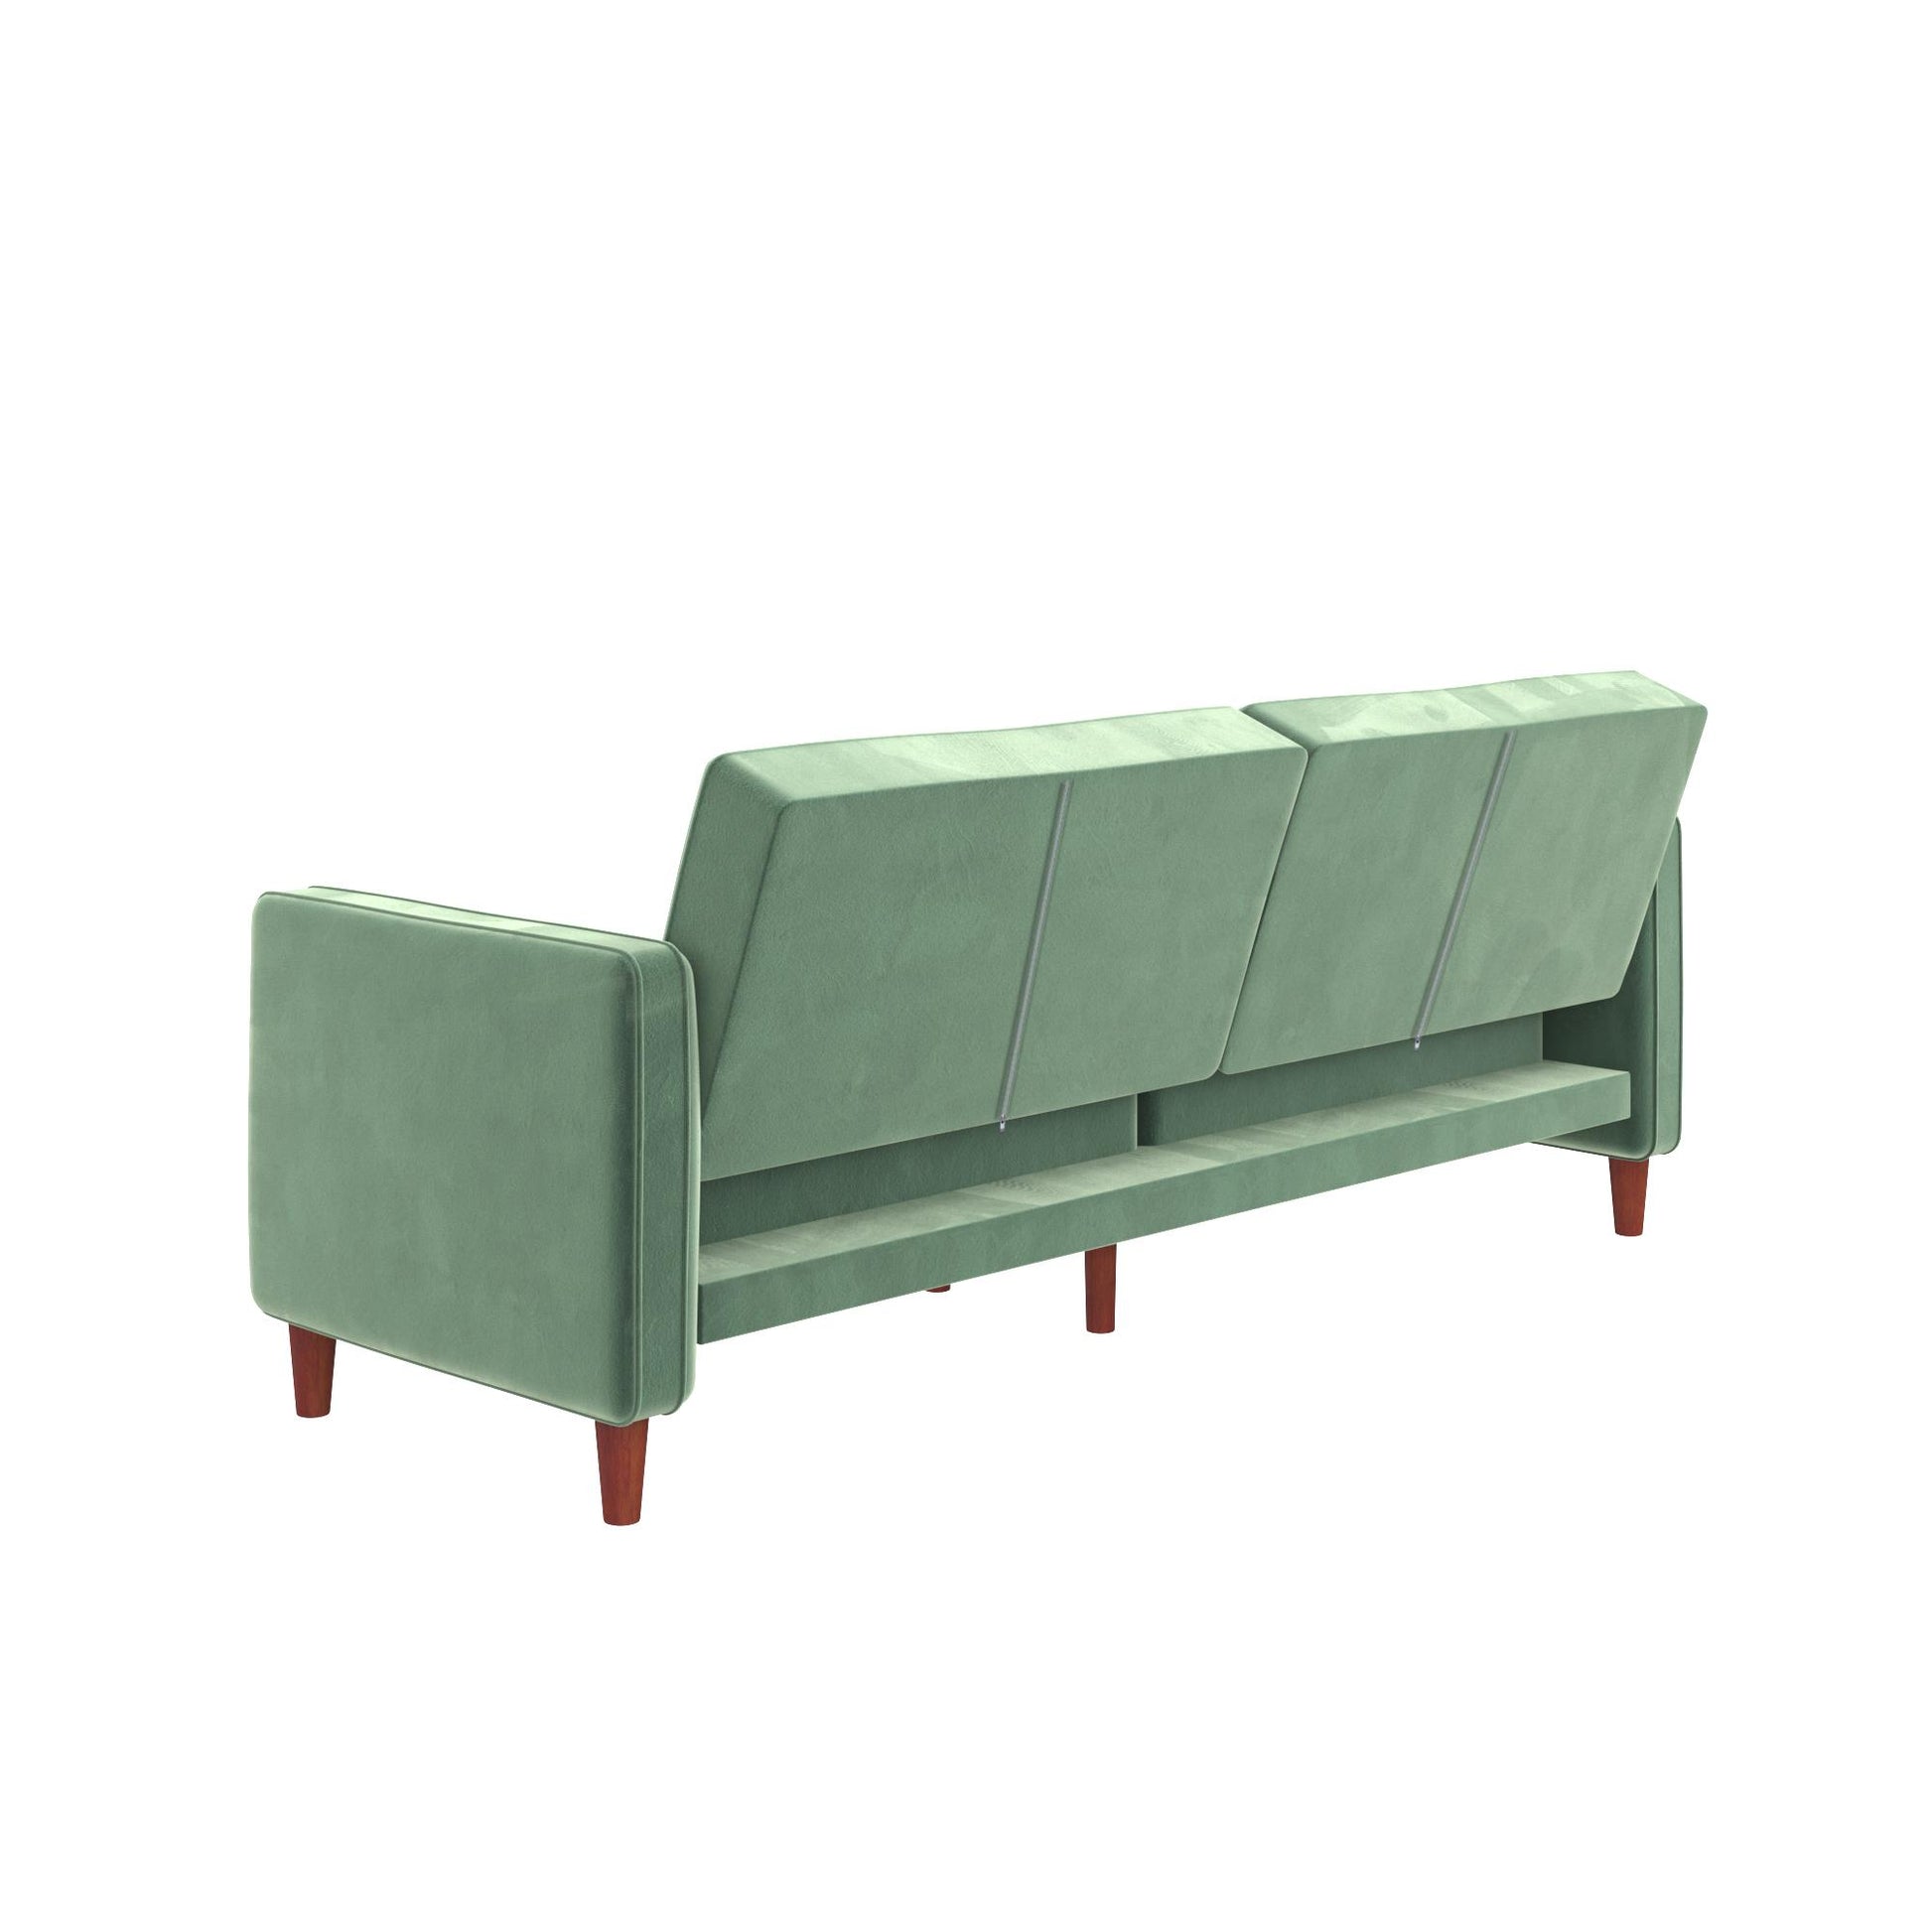 Pin Tufted Transitional Futon with Vertical Stitching and Button Tufting - Light Green